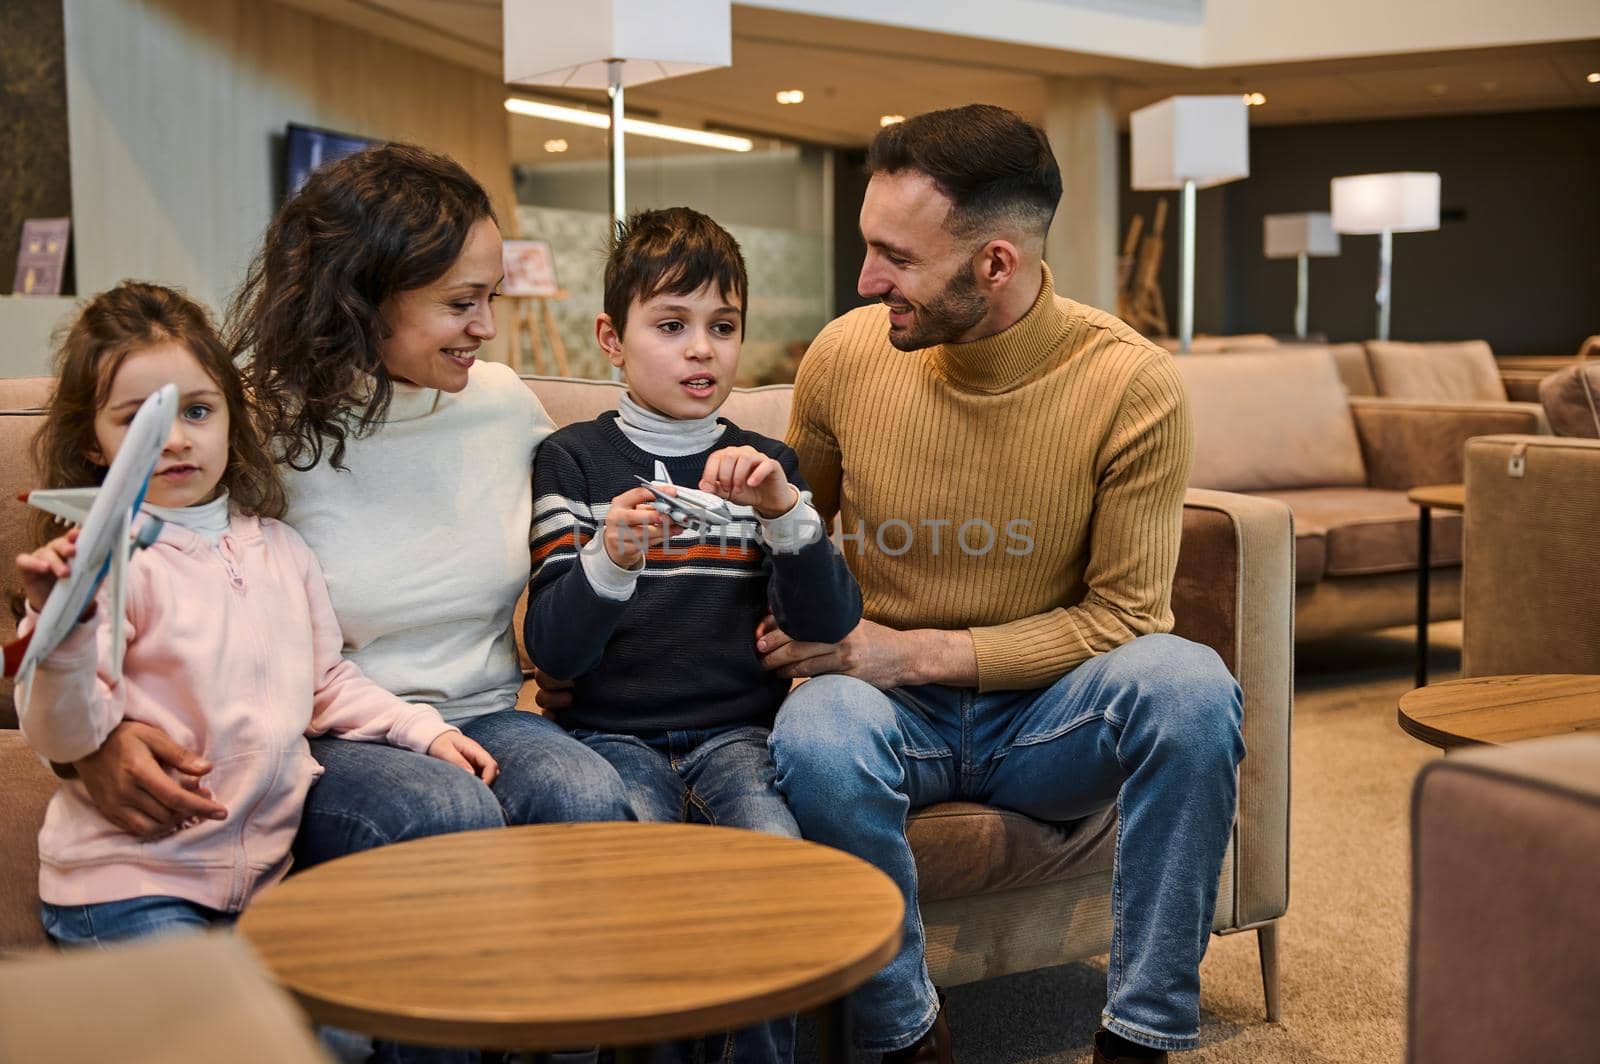 Portrait of happy Caucasian family resting in the VIP lounge of the international airport departure terminal waiting to board the flight. Children - son and daughter playing with toy planes